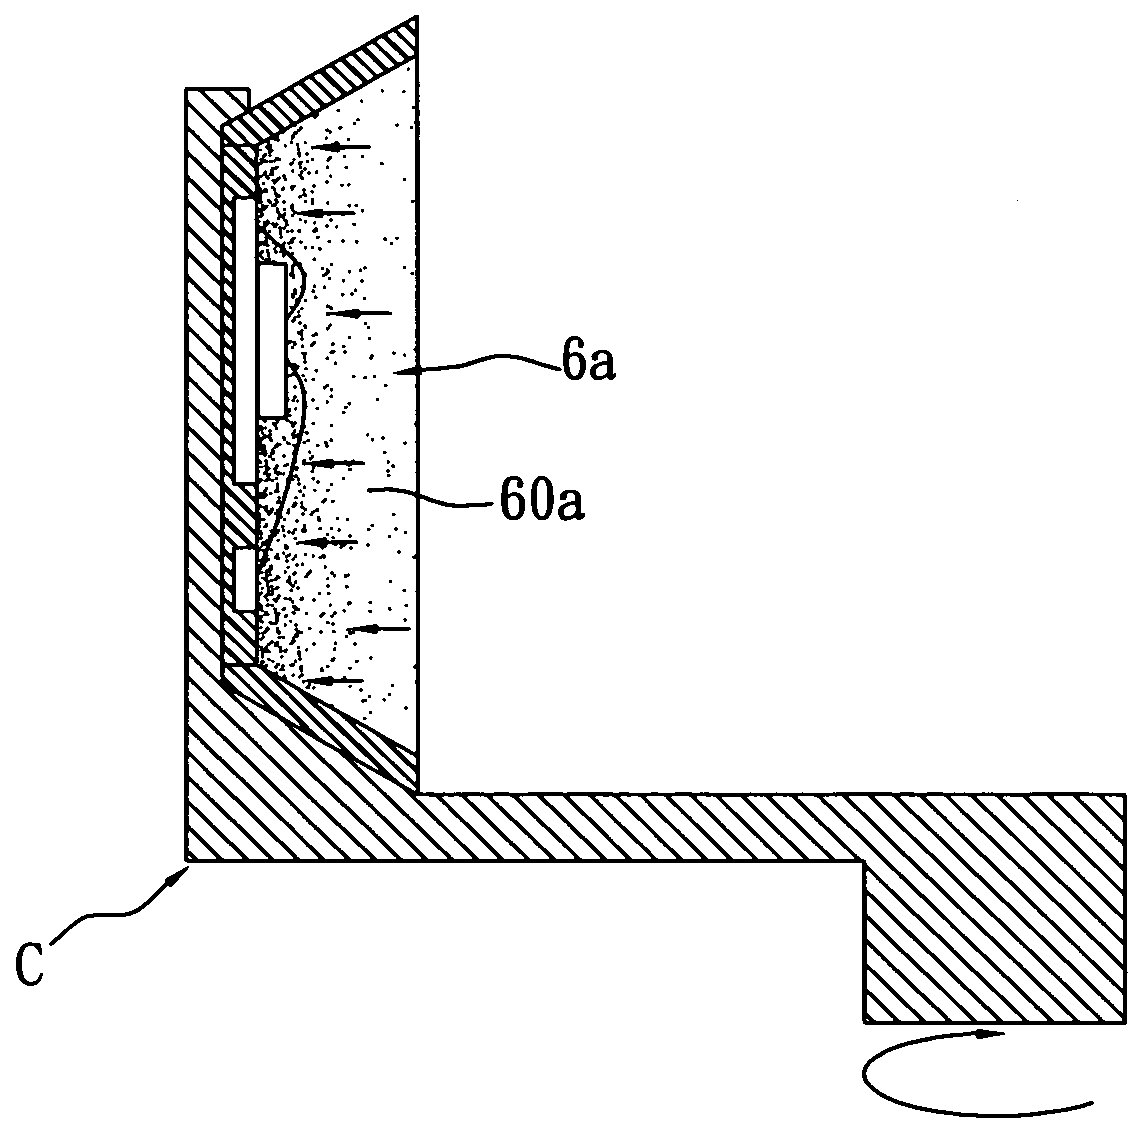 Led chip package structure using sedimentation and method for making the same